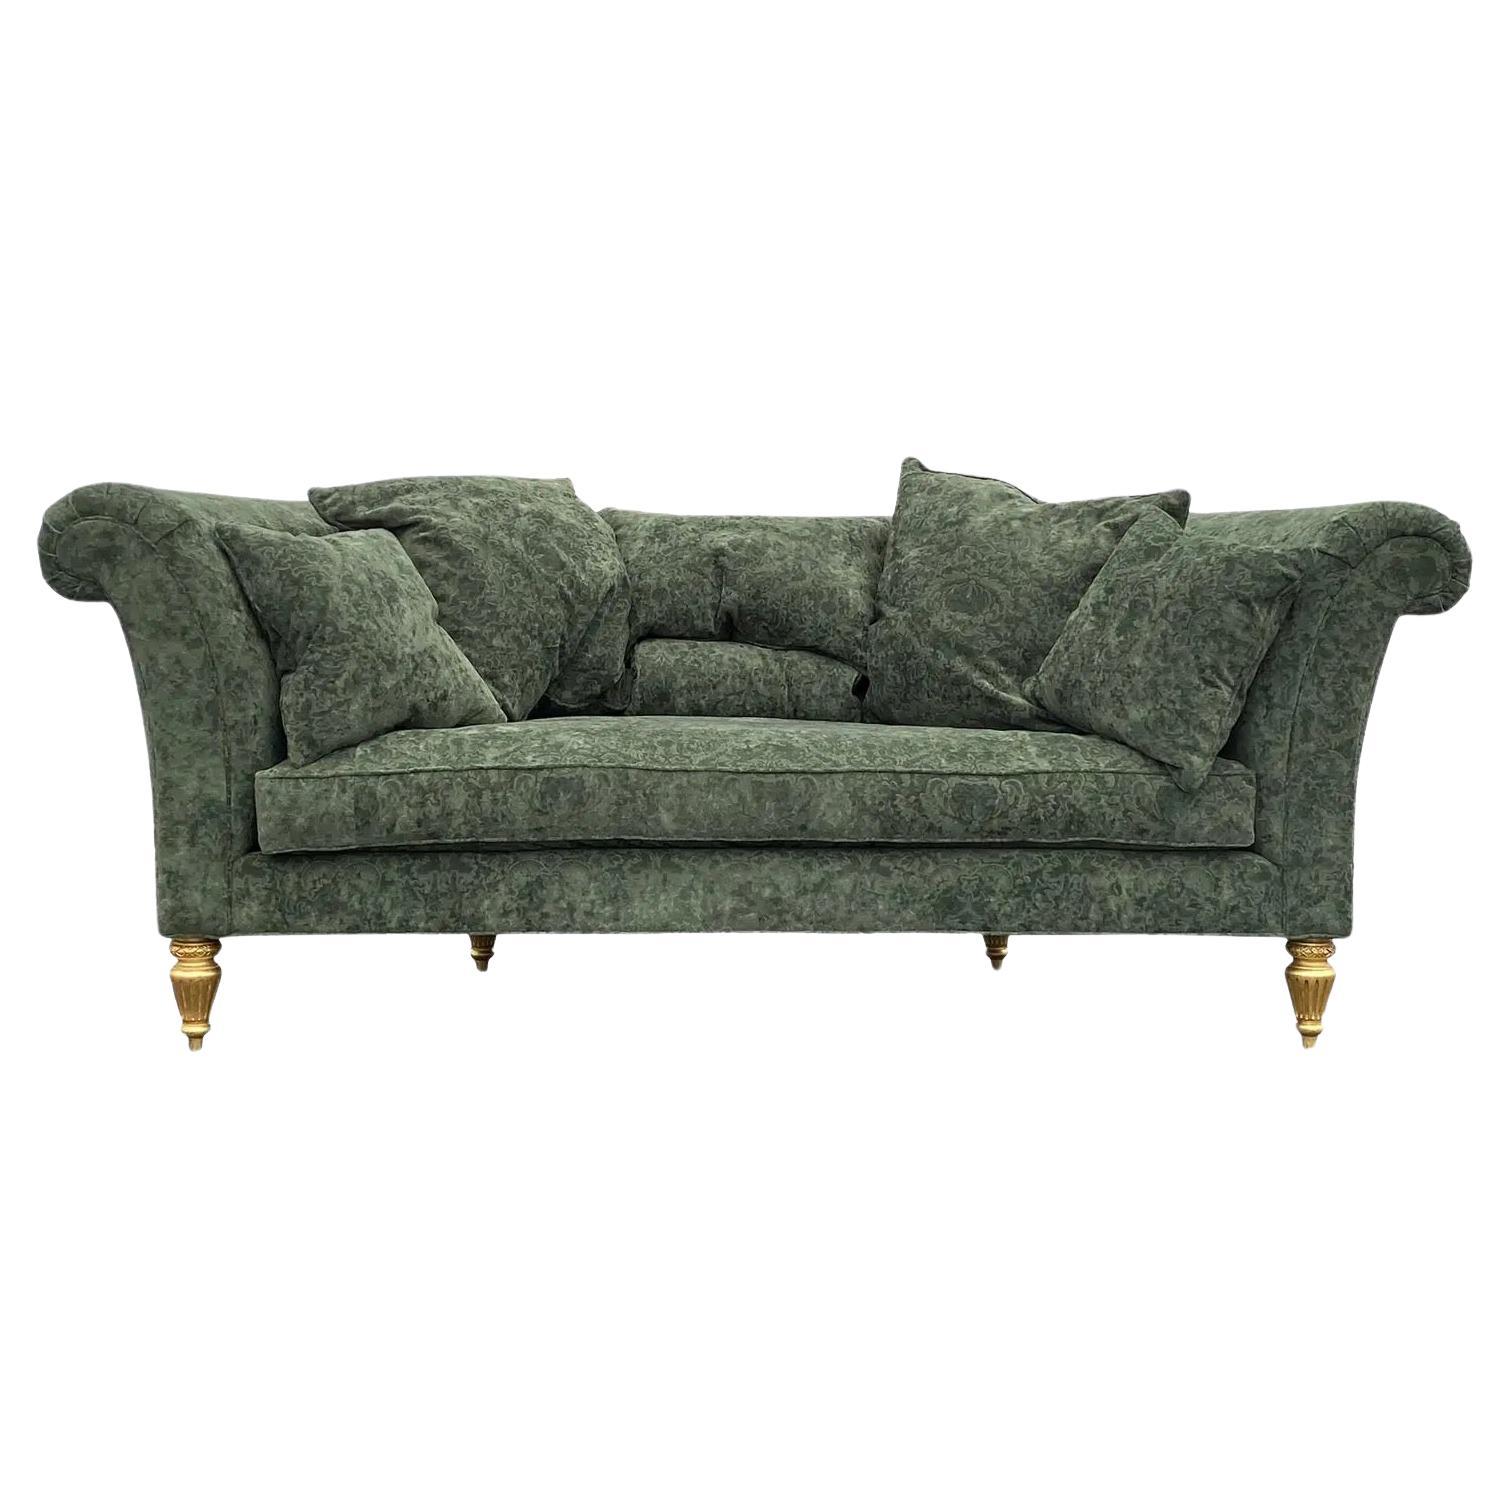 Henredon Schoonbeck Collection Green Damask Demilune Sofa With Six Throw Pillows For Sale